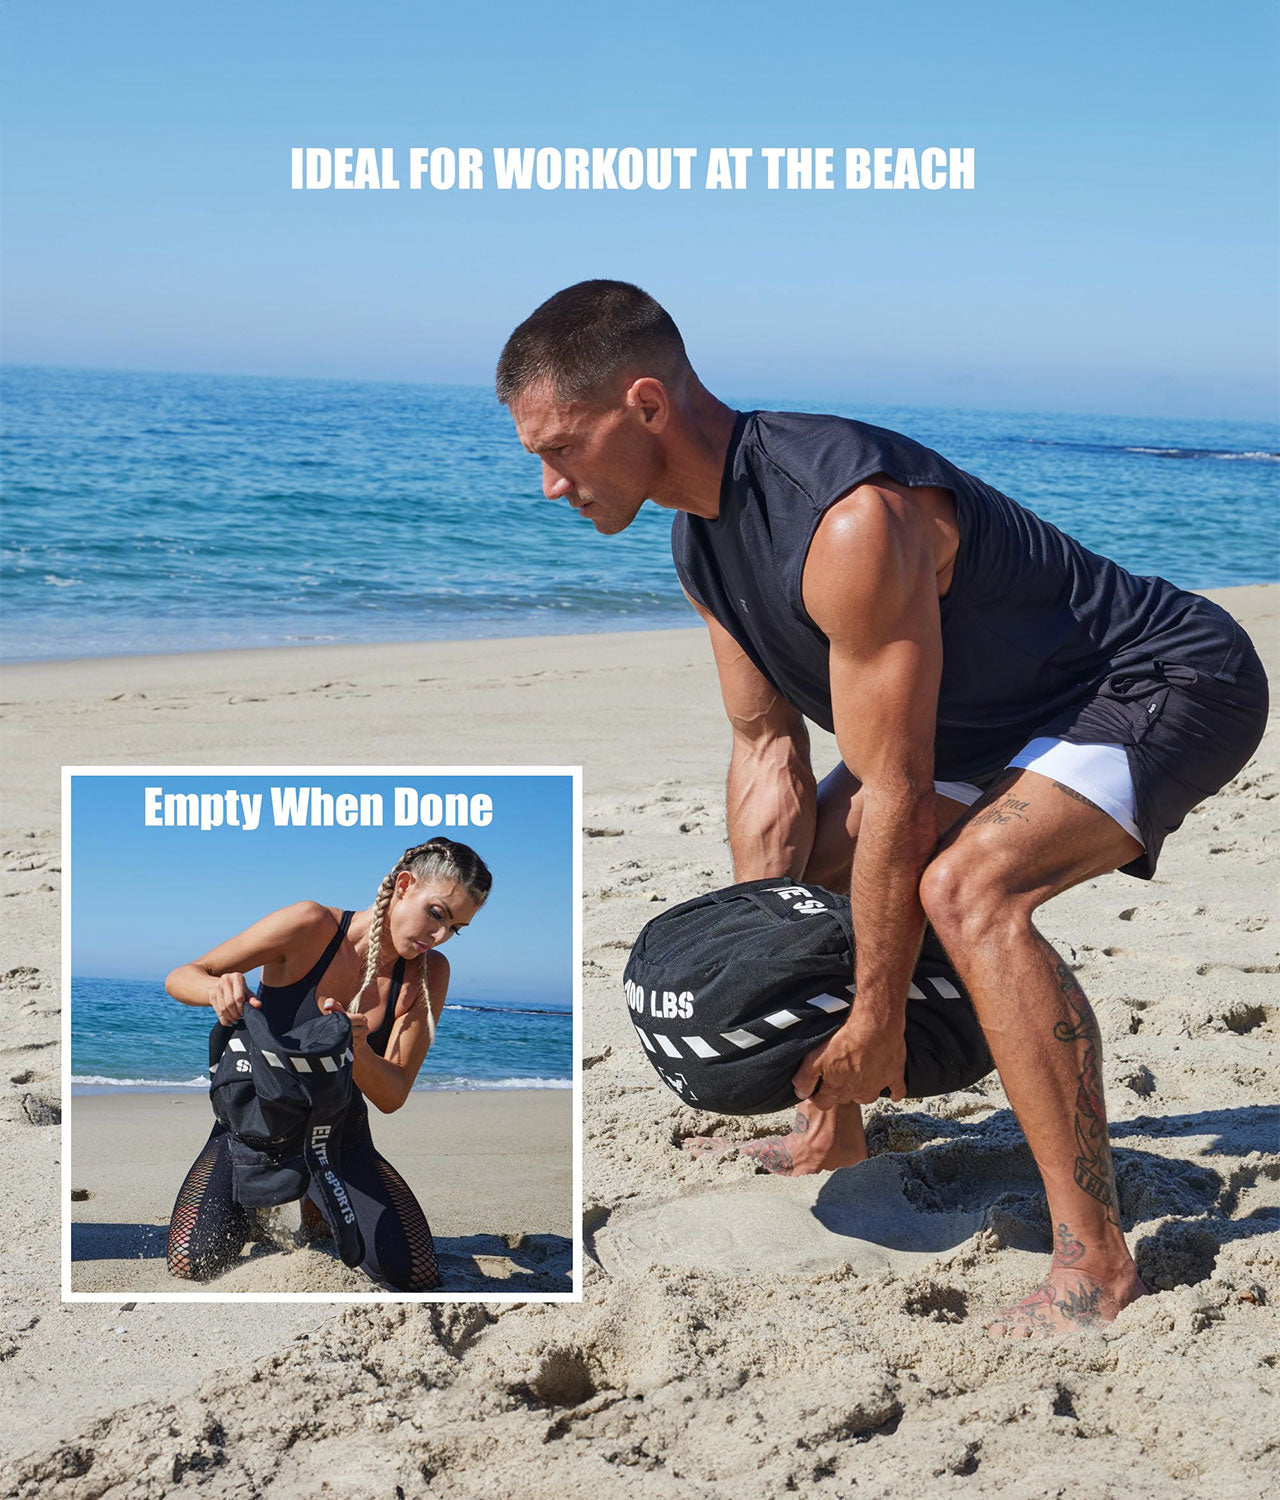 Elite Sports Core Round Workout Sandbag 35 lbs Ideal For Workout At the Beach